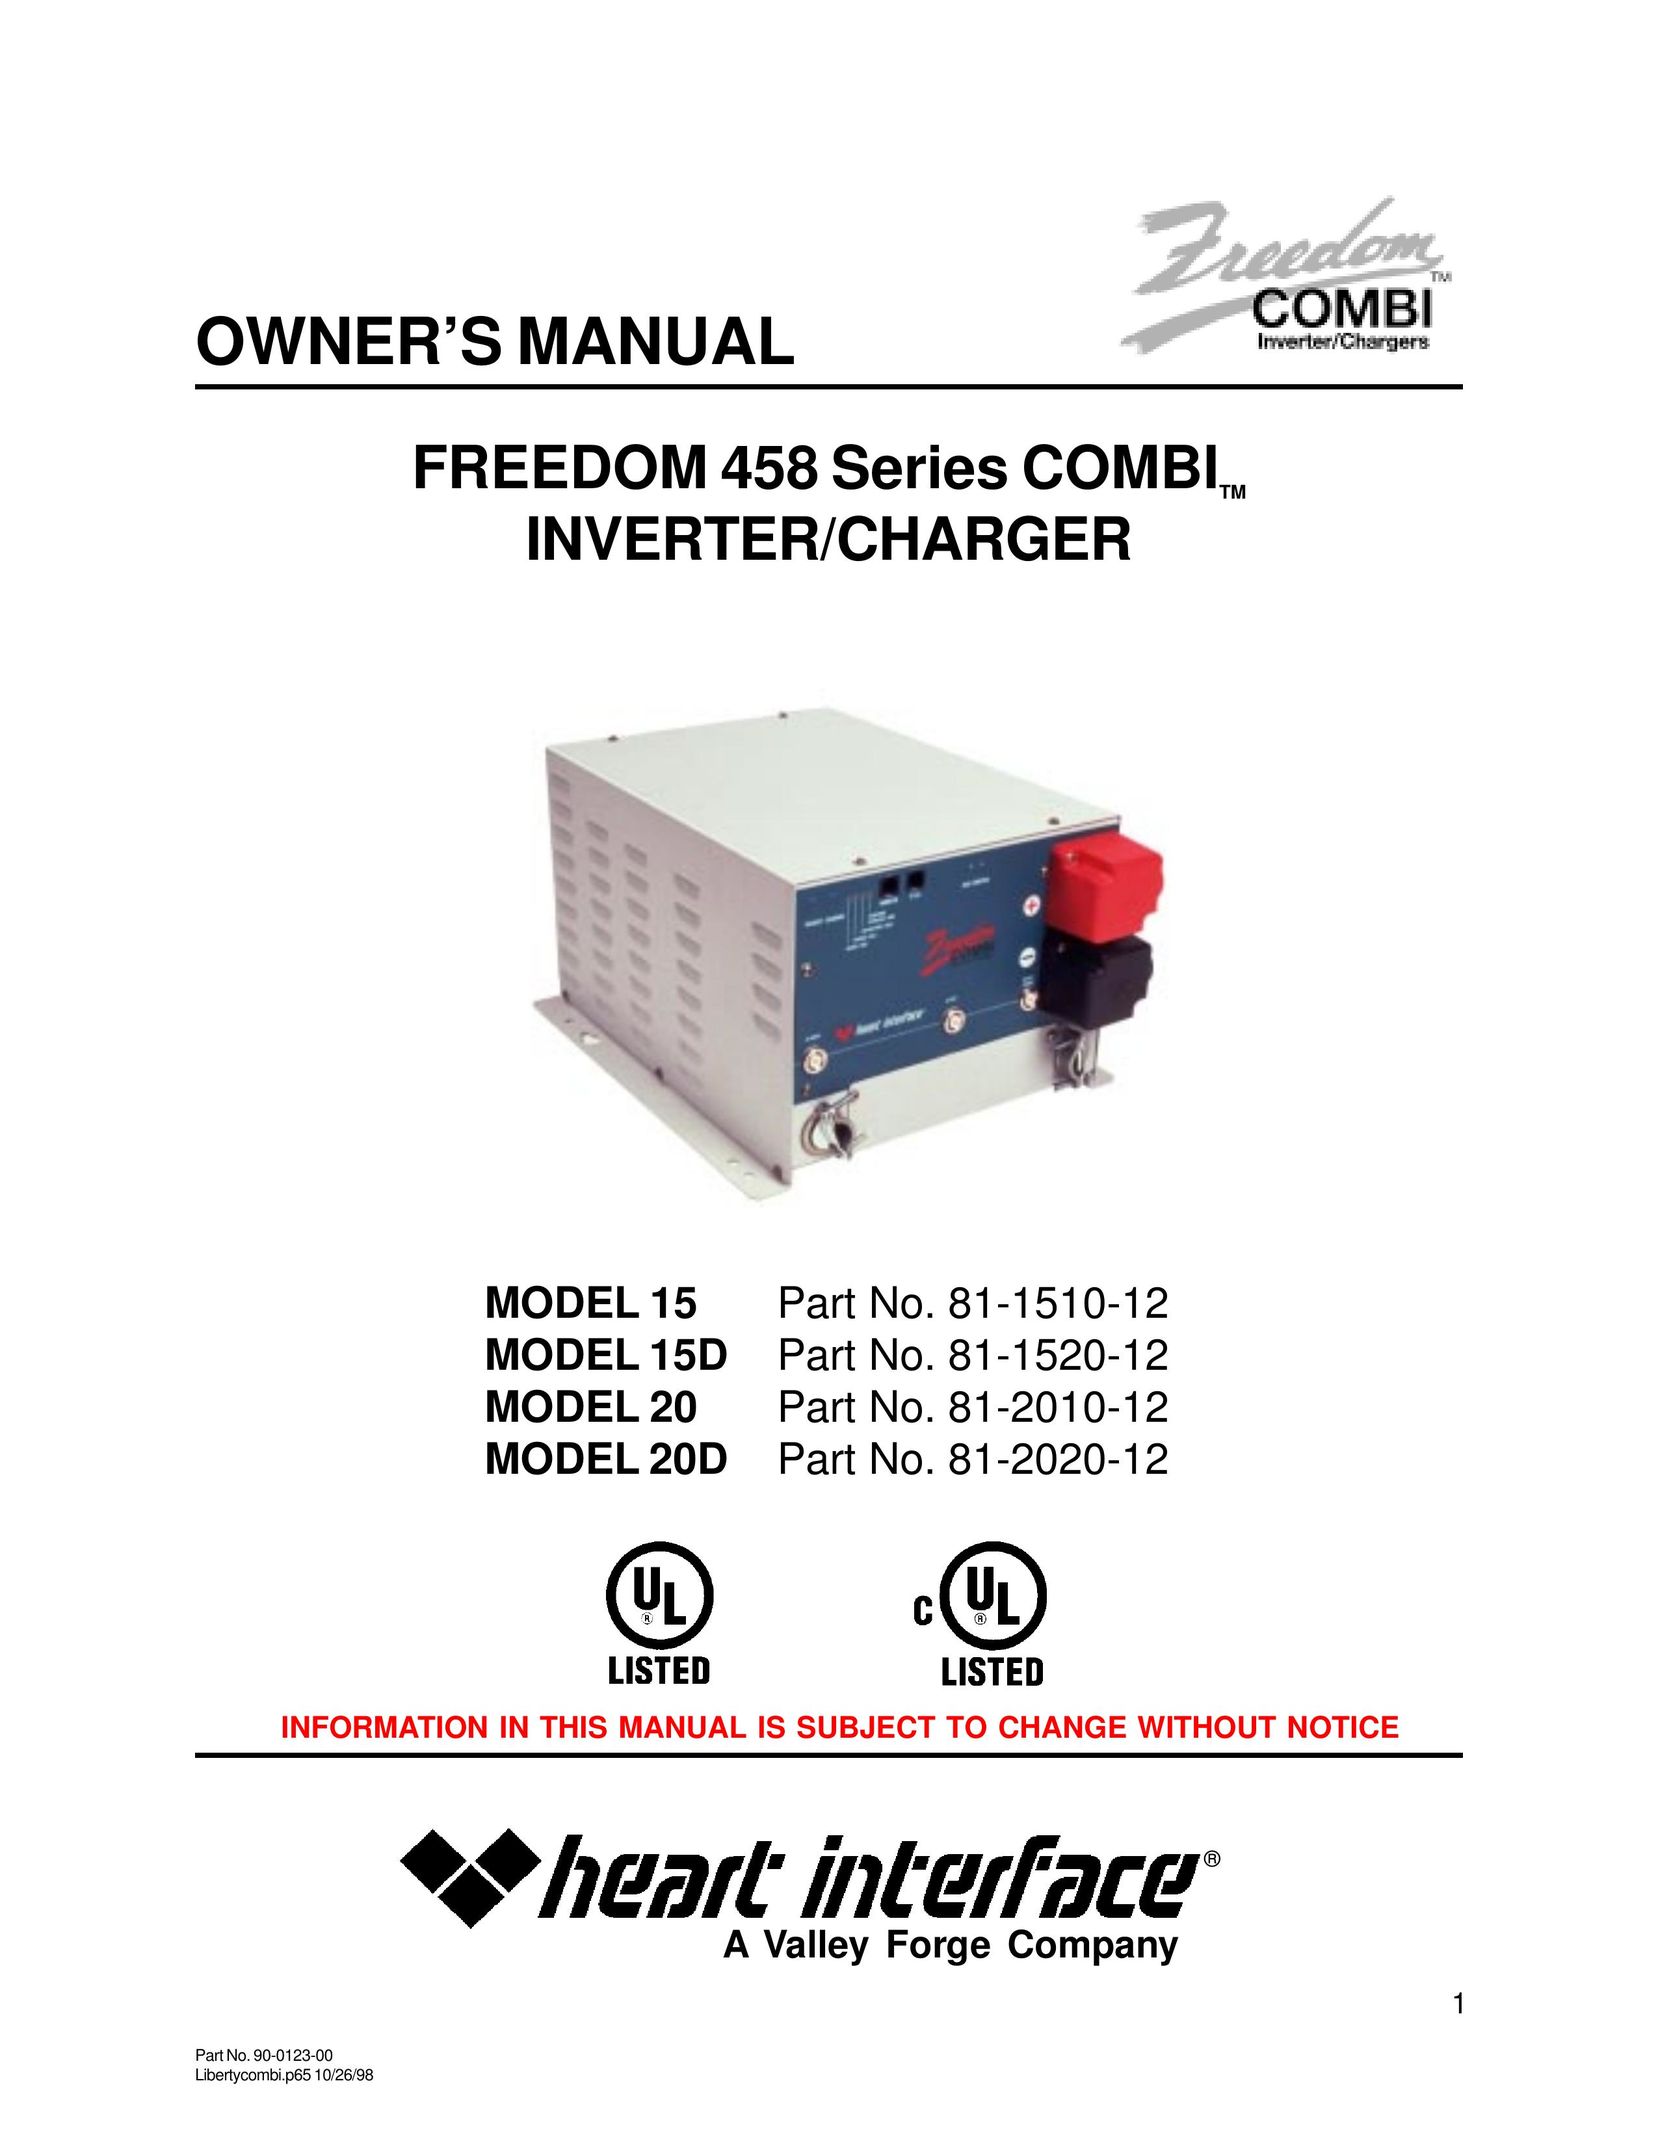 Thomas & Betts 15D Battery Charger User Manual